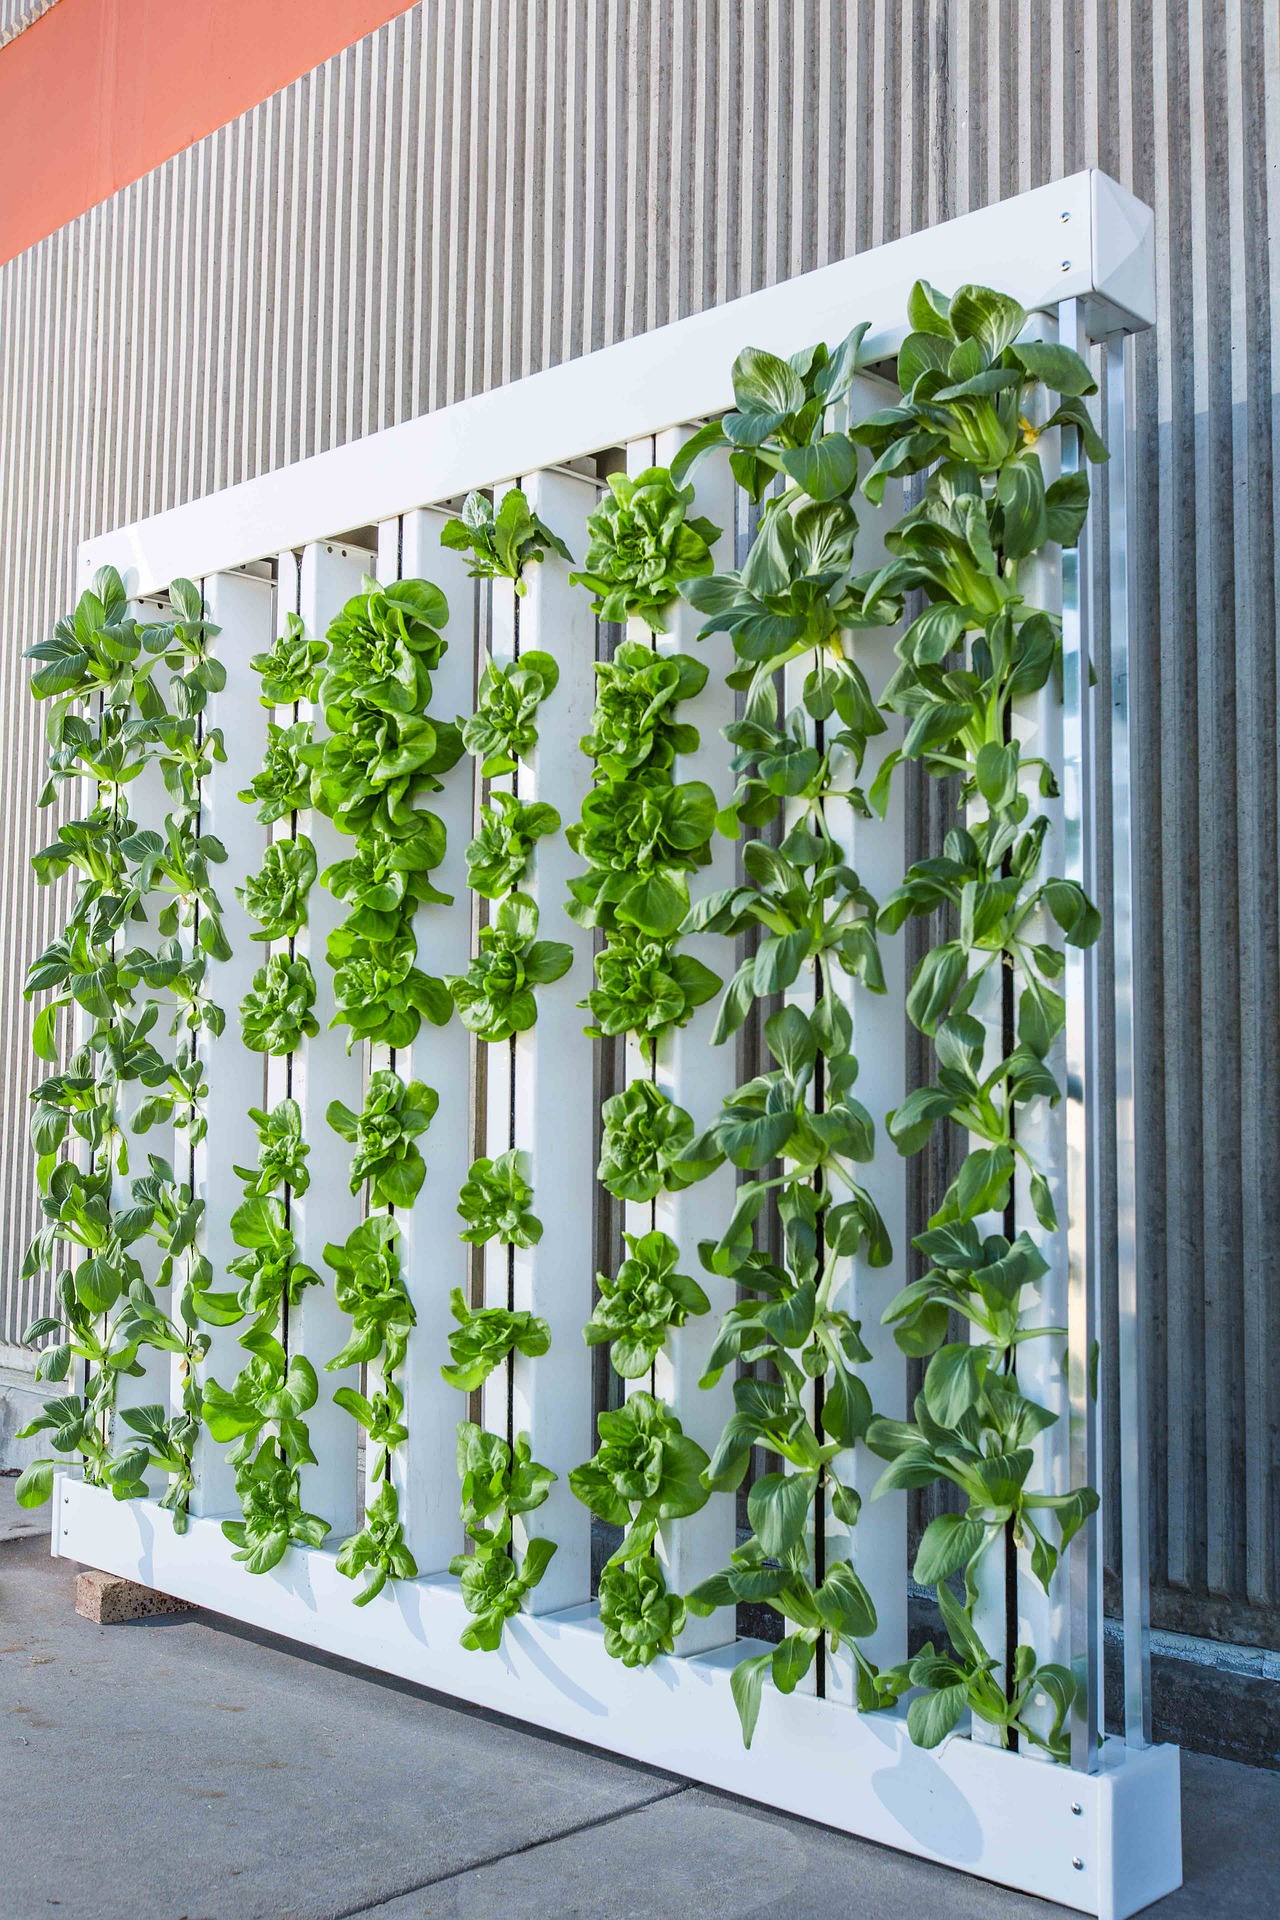 Vertical Growing and Future of the Produce Industry